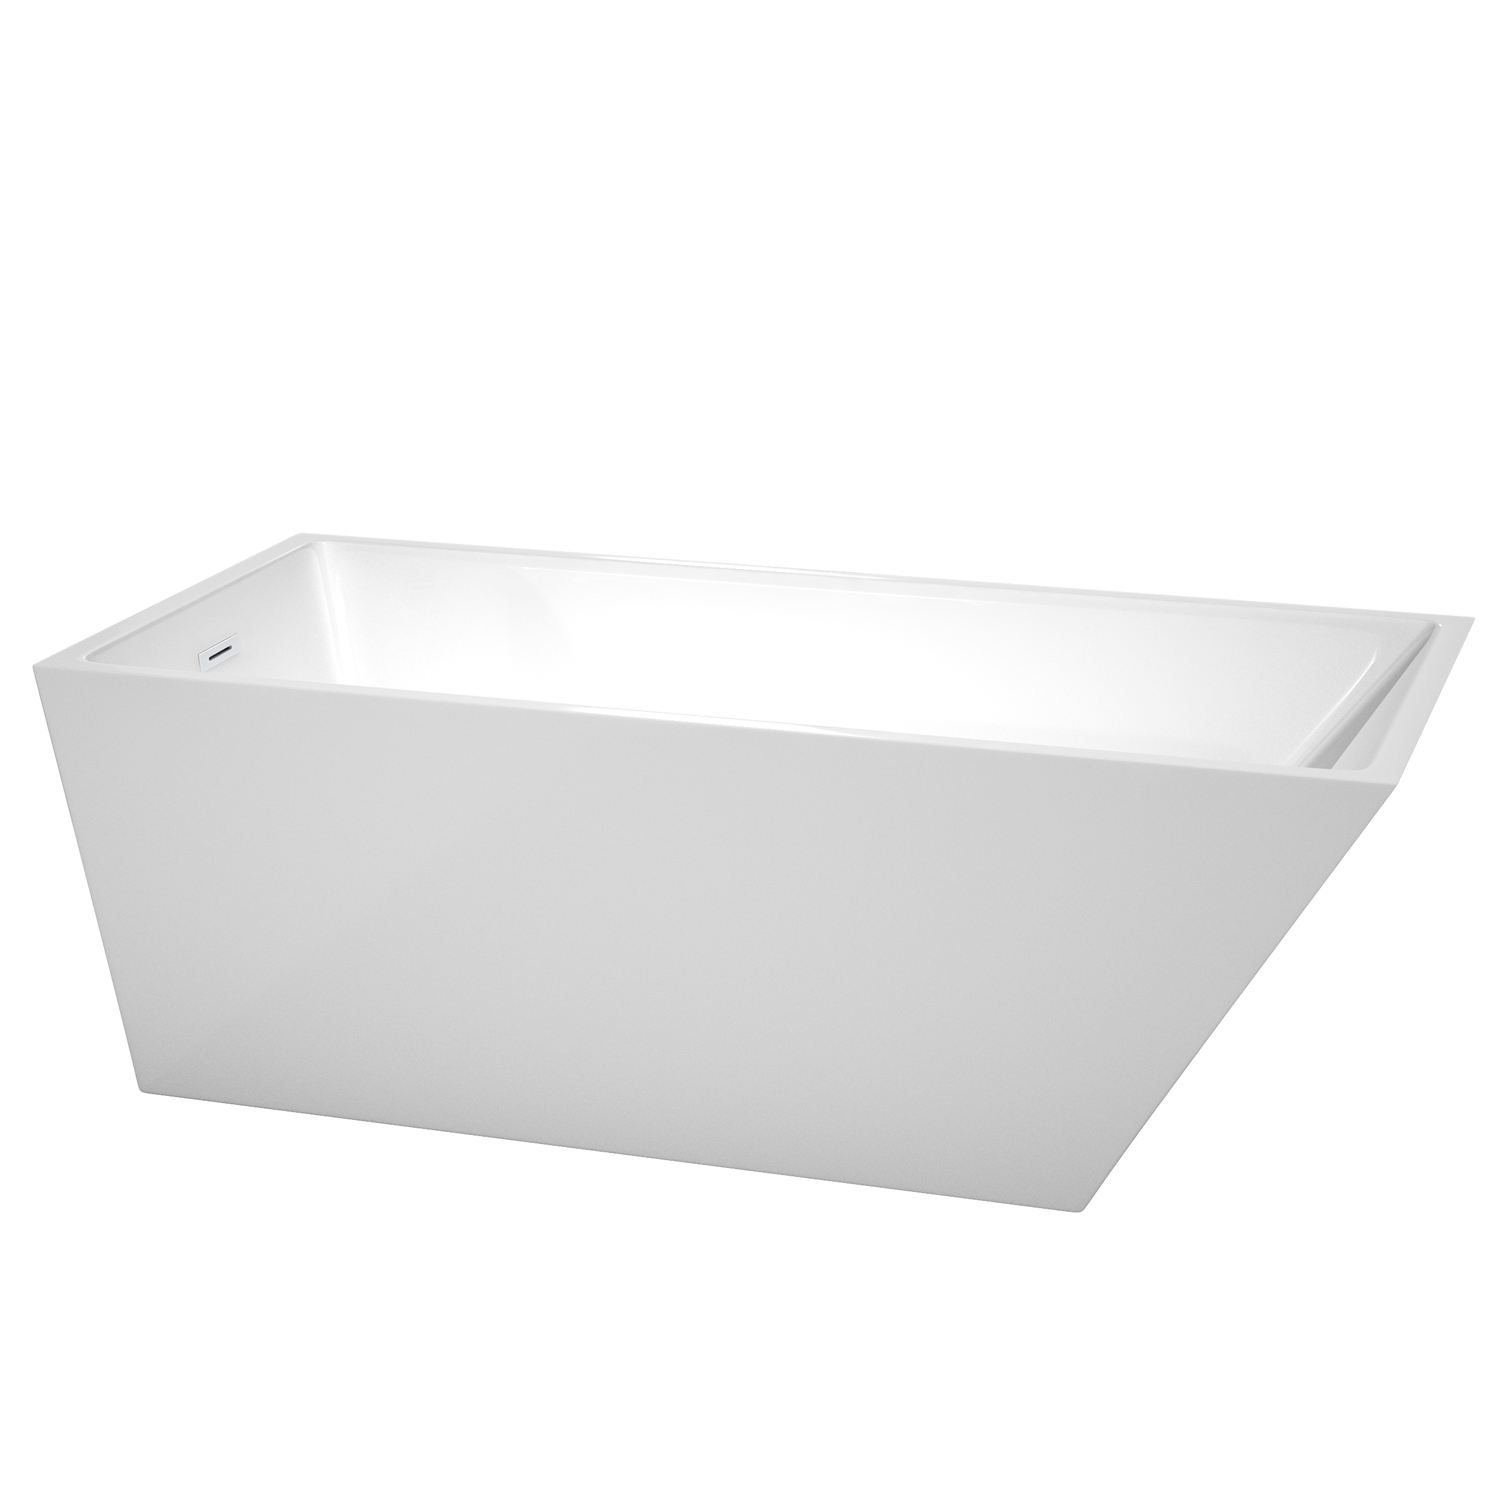 67" Freestanding Bathtub in White with Overflow Trim and Shiny White Drain 